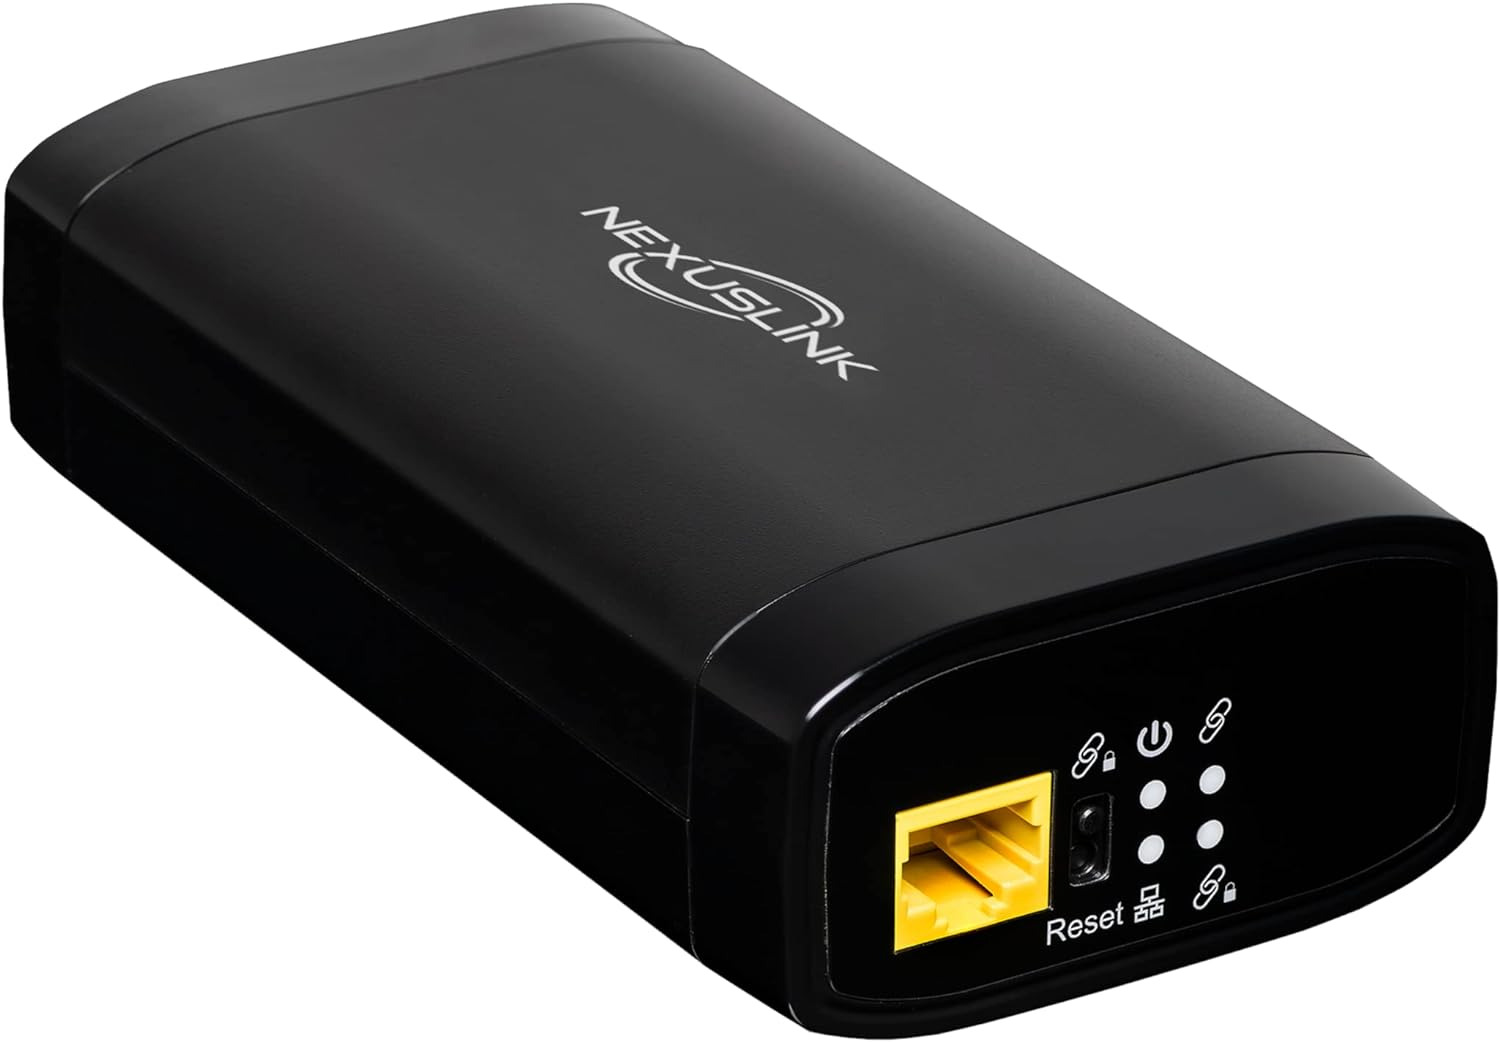 G.Hn Ethernet over Coax Adapter | 2000 Mbps, Fast and Secure Network Performance